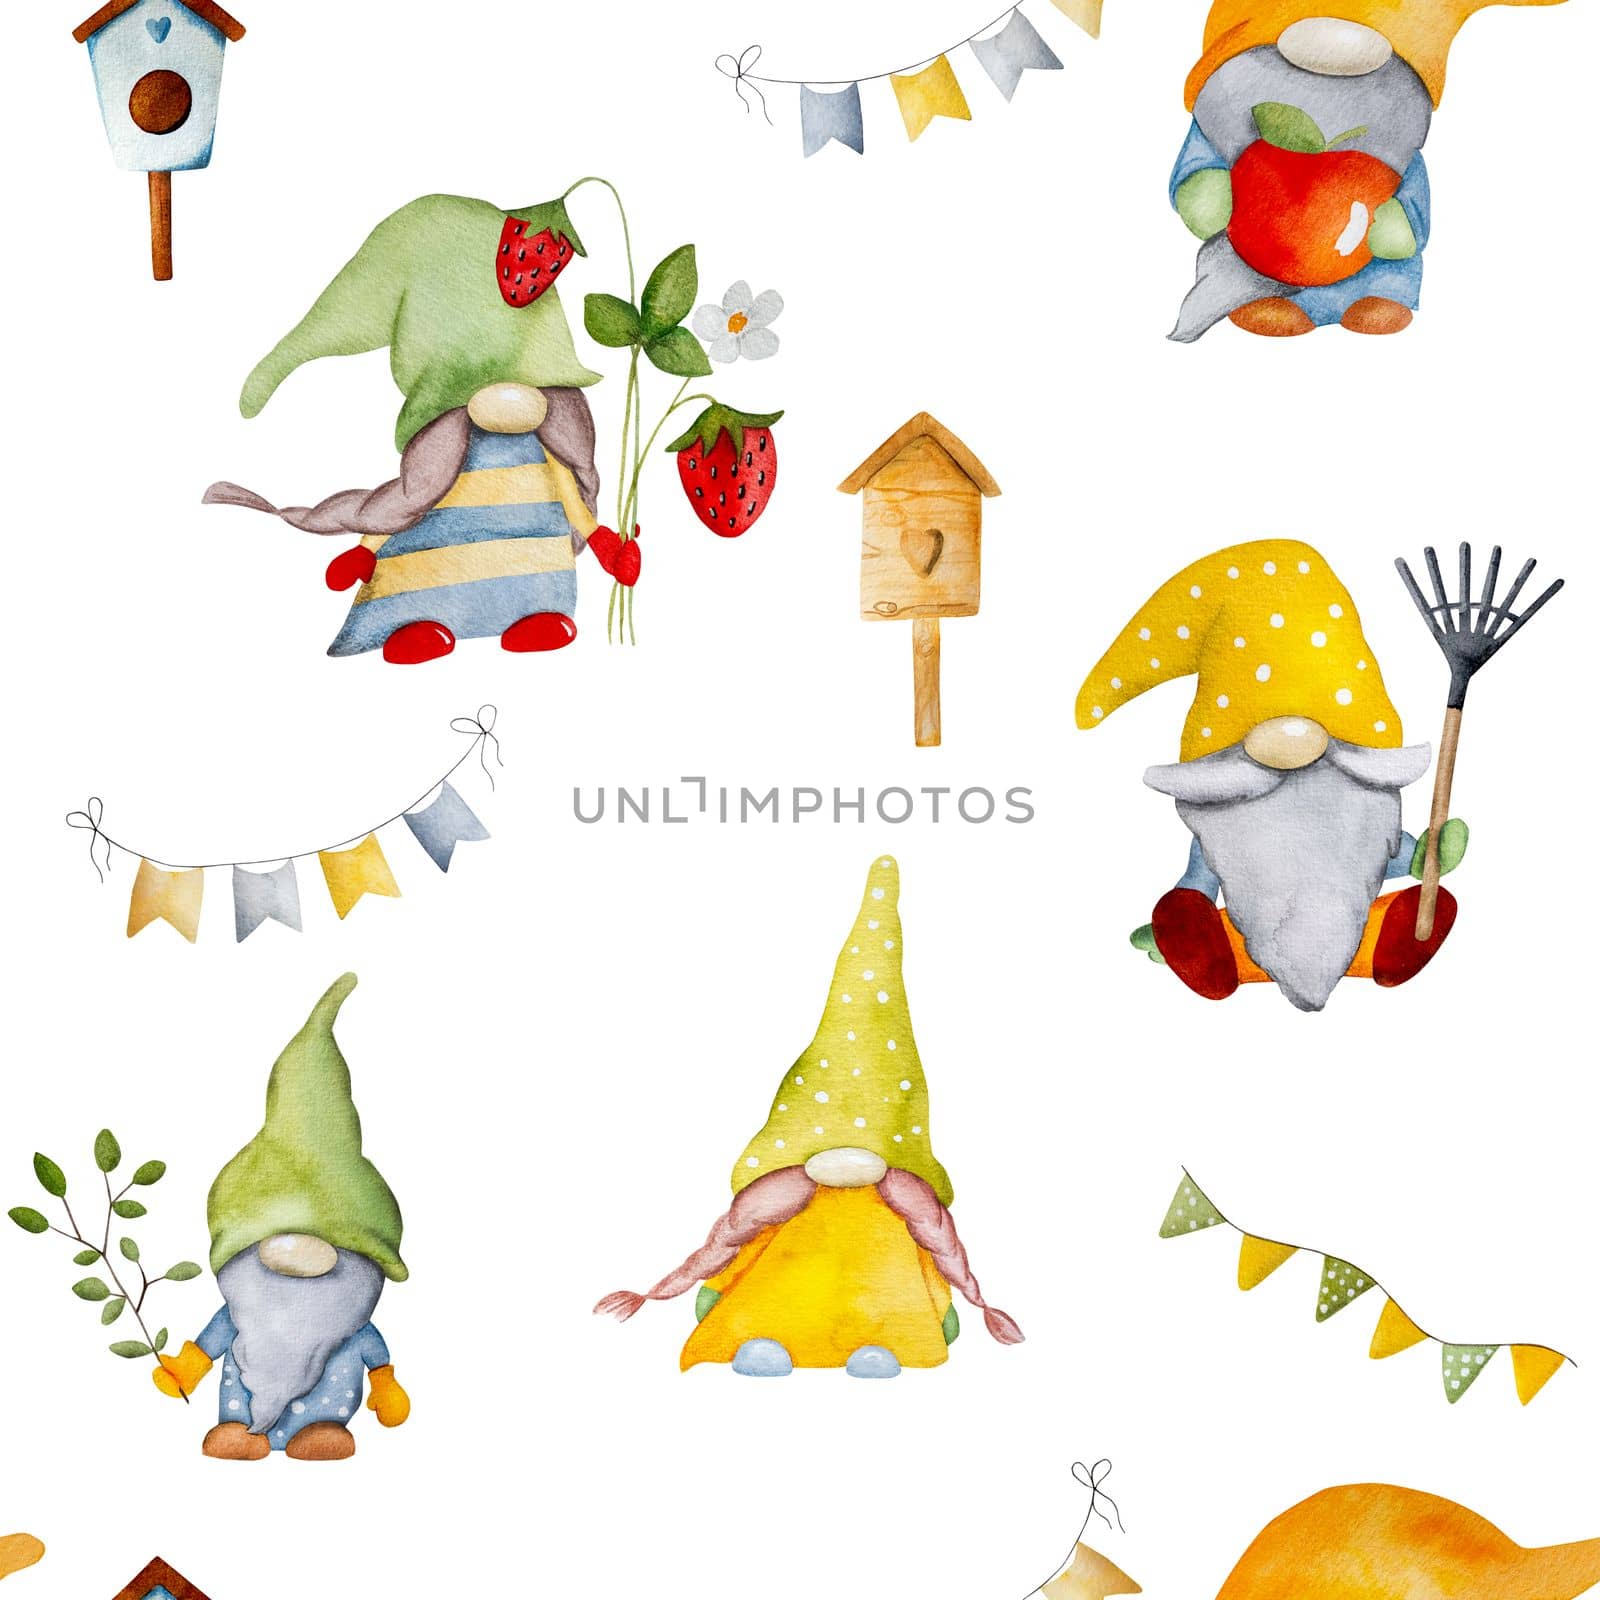 Cute watercolor gnomes dwarfs drawings set on white background for postcards. Troll elfs aquarelle paintings collection